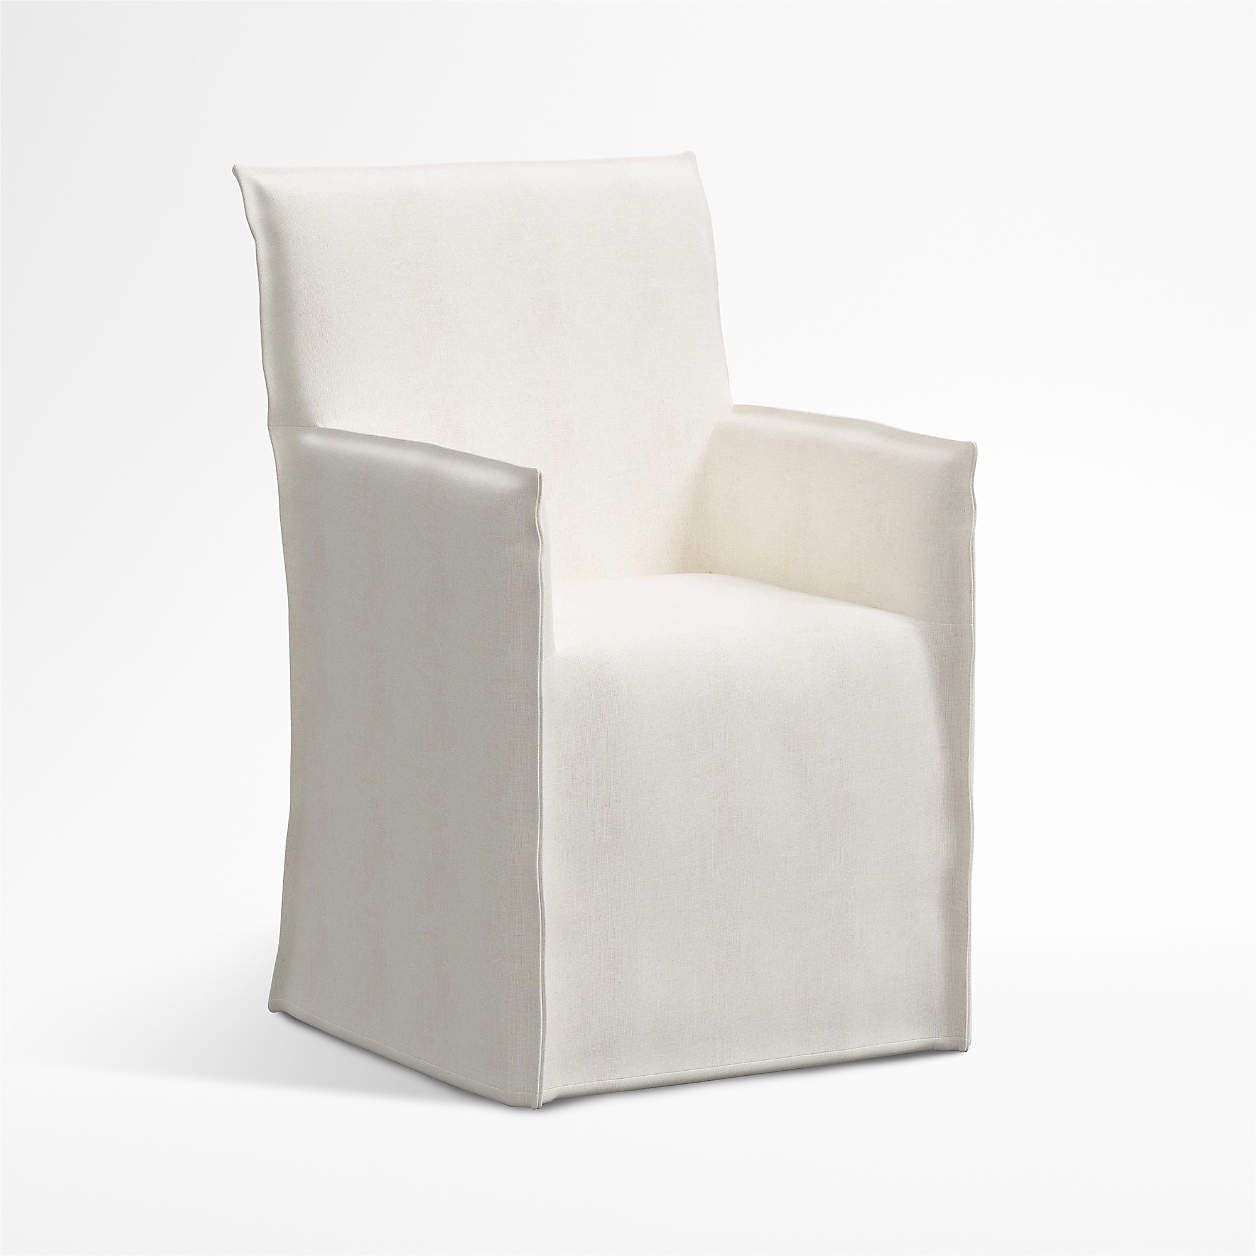 Addison White Flange Slipcovered Dining Chair + Reviews | Crate & Barrel | Crate & Barrel